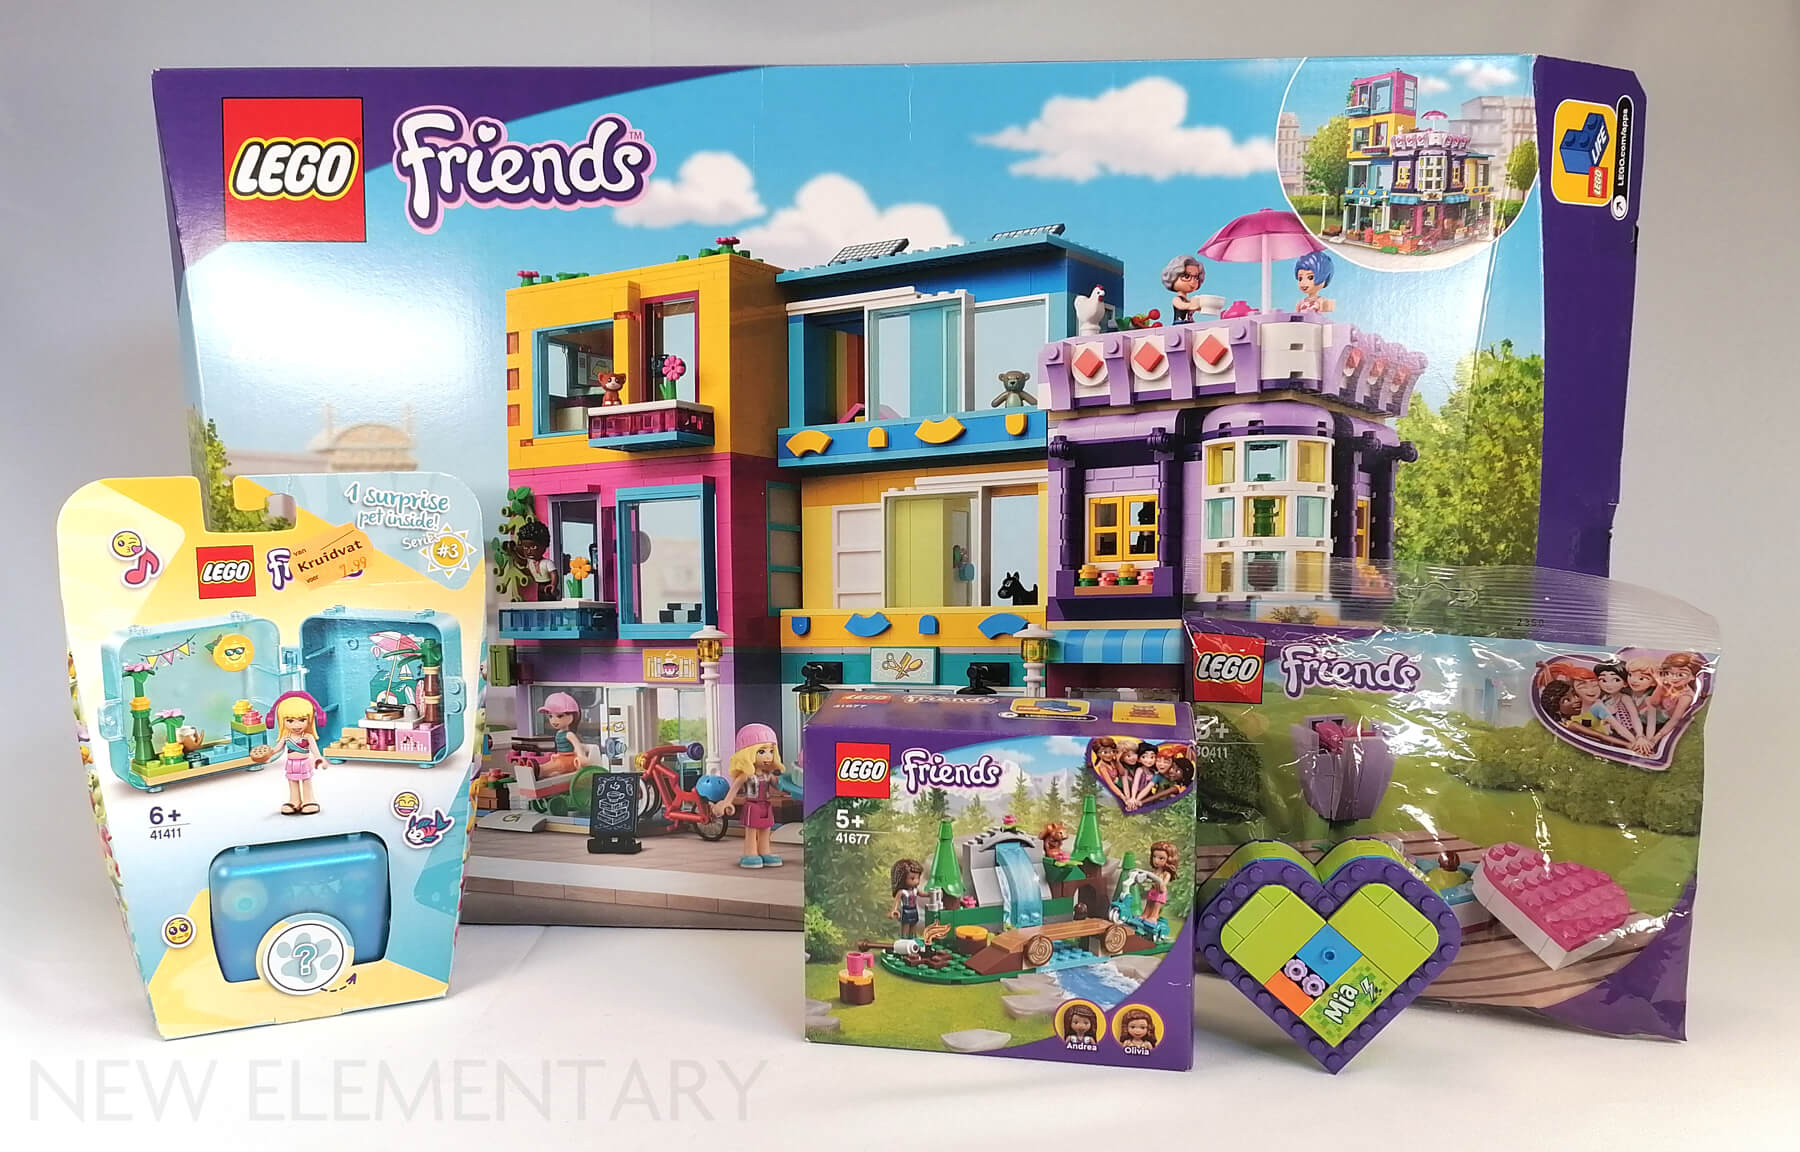 Lego Friends: It's Lego But, You Know, for Girls